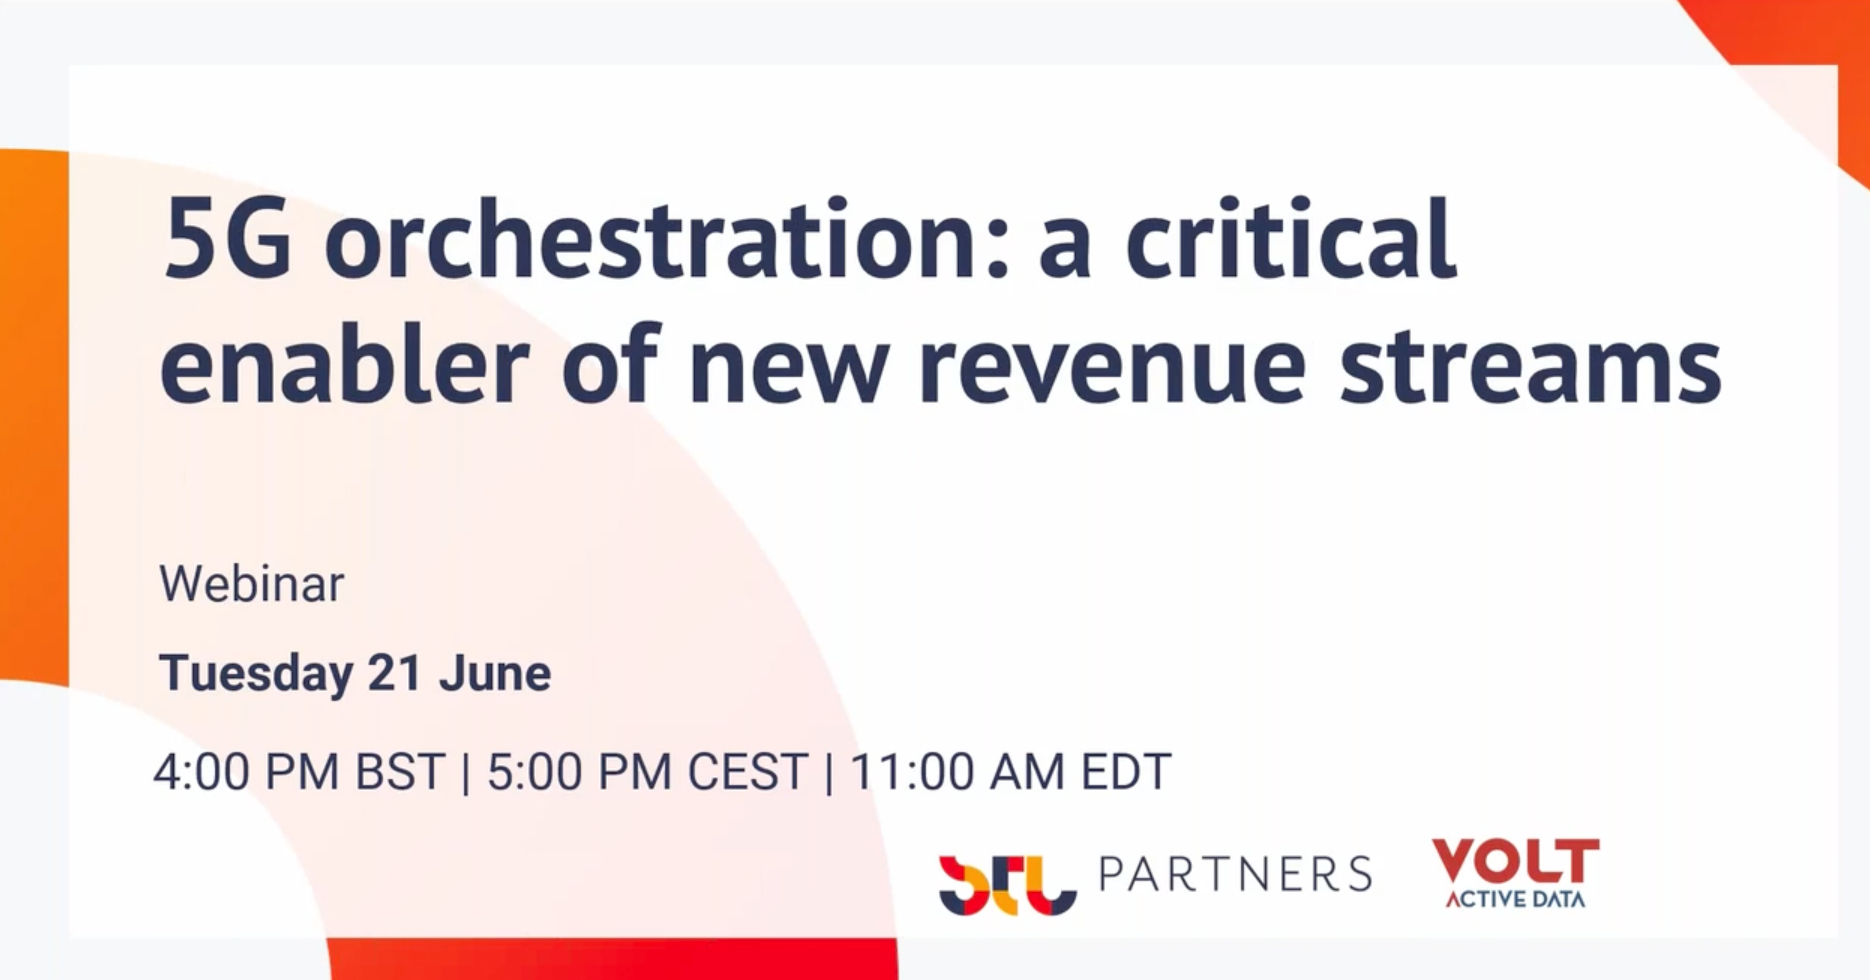 5G Orchestration: A Critical Enabler of New Revenue Streams Webinar